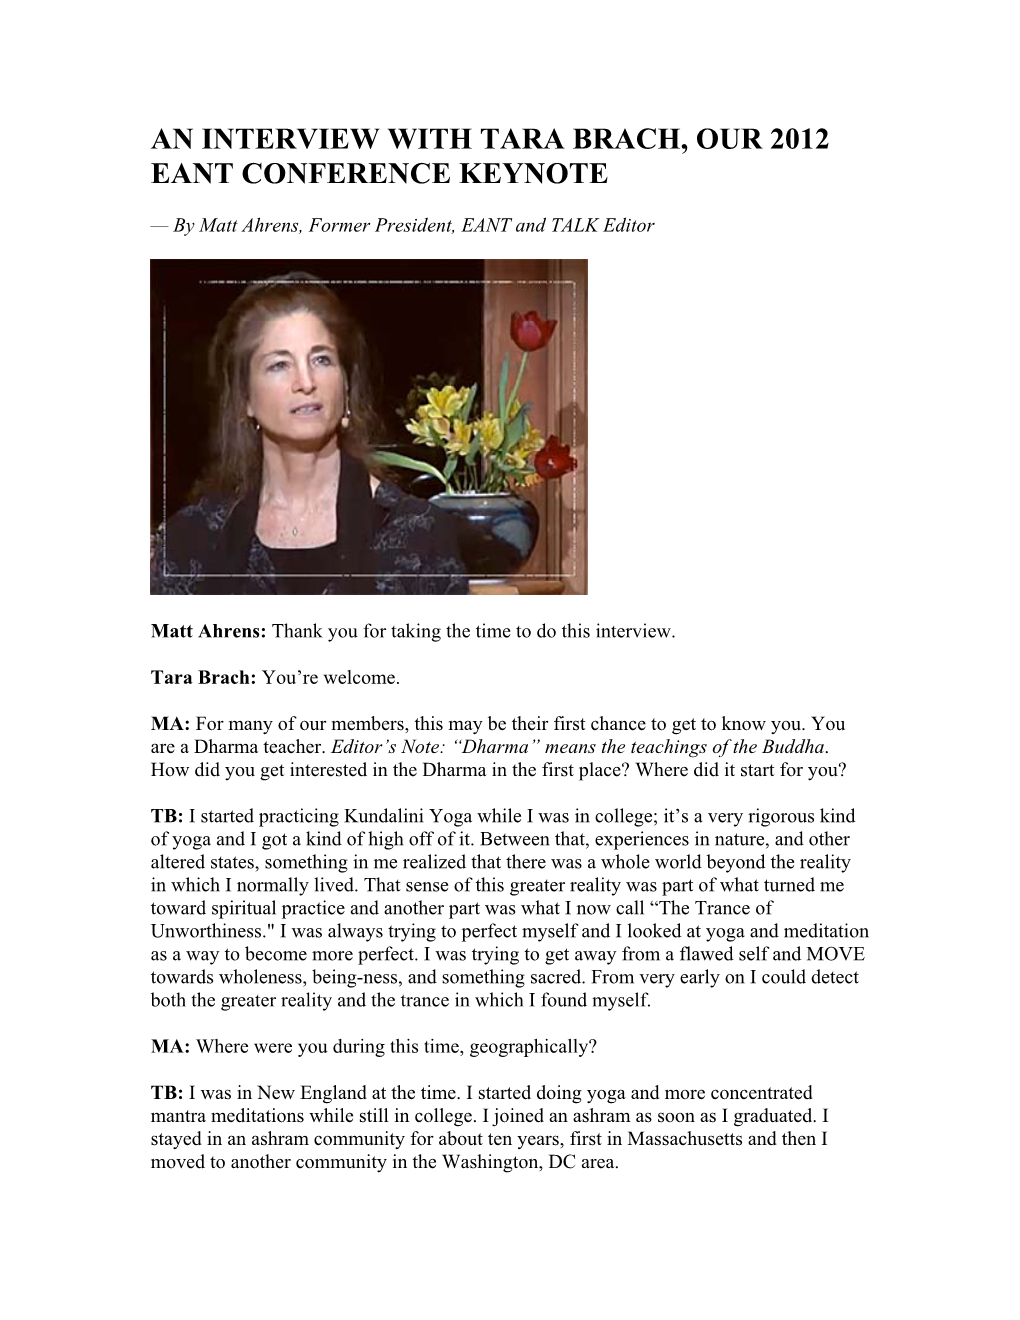 An Interview with Tara Brach, Our 2012 Eant Conference Keynote